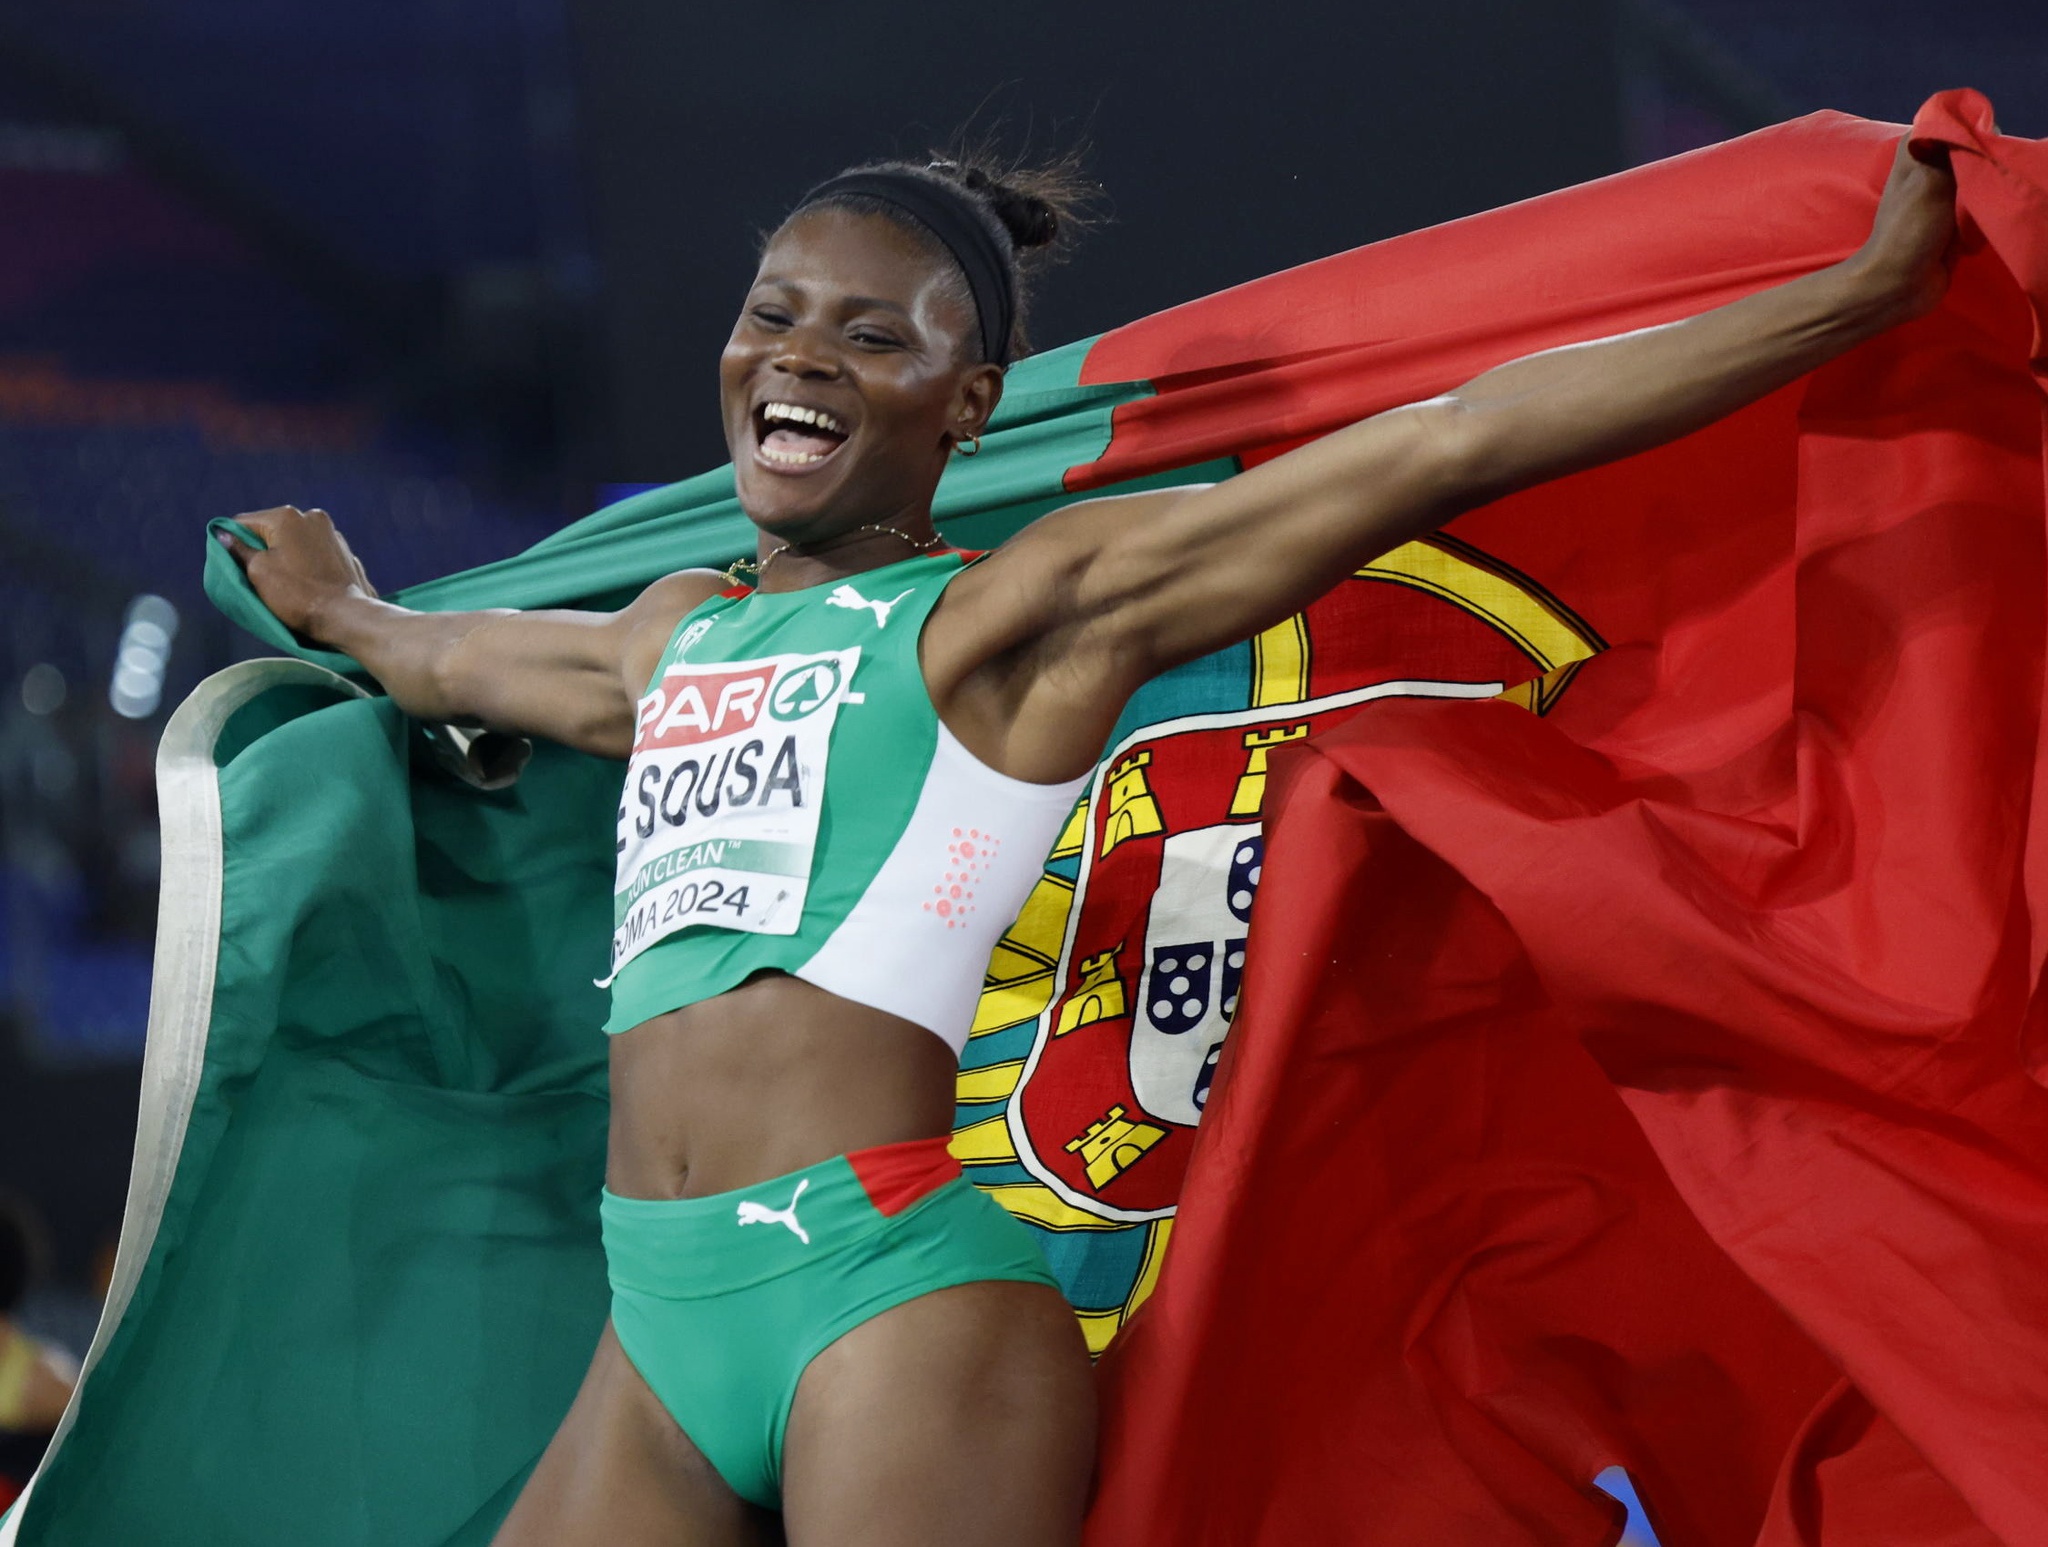 Agate de Sousa gained Portugal’s third medal on the European Championships